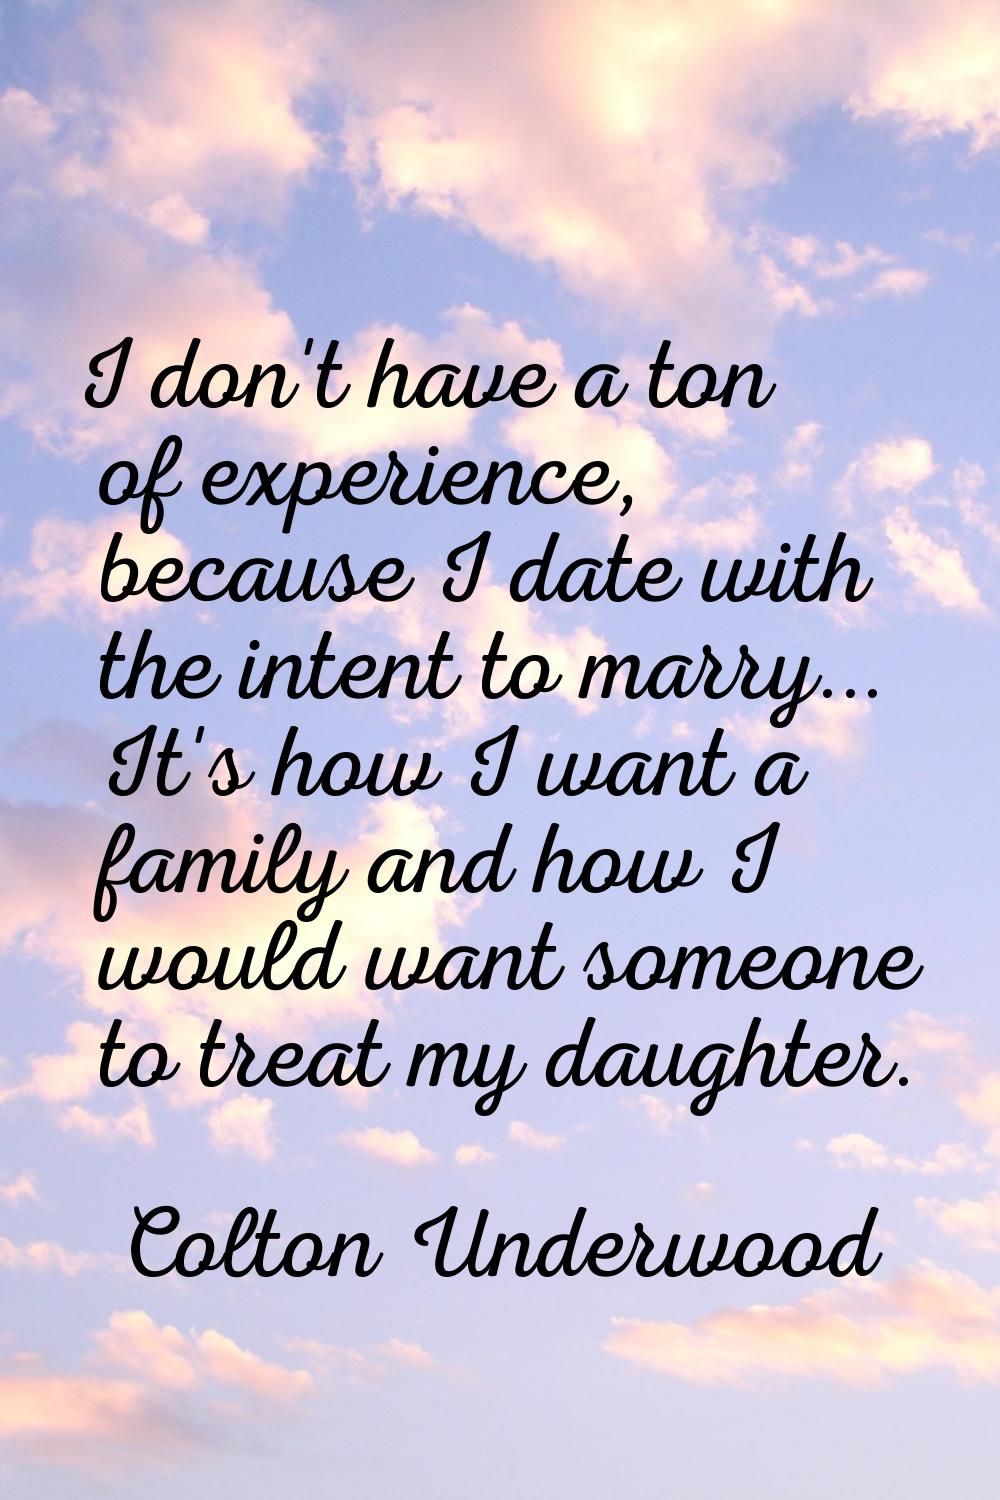 I don't have a ton of experience, because I date with the intent to marry... It's how I want a fami